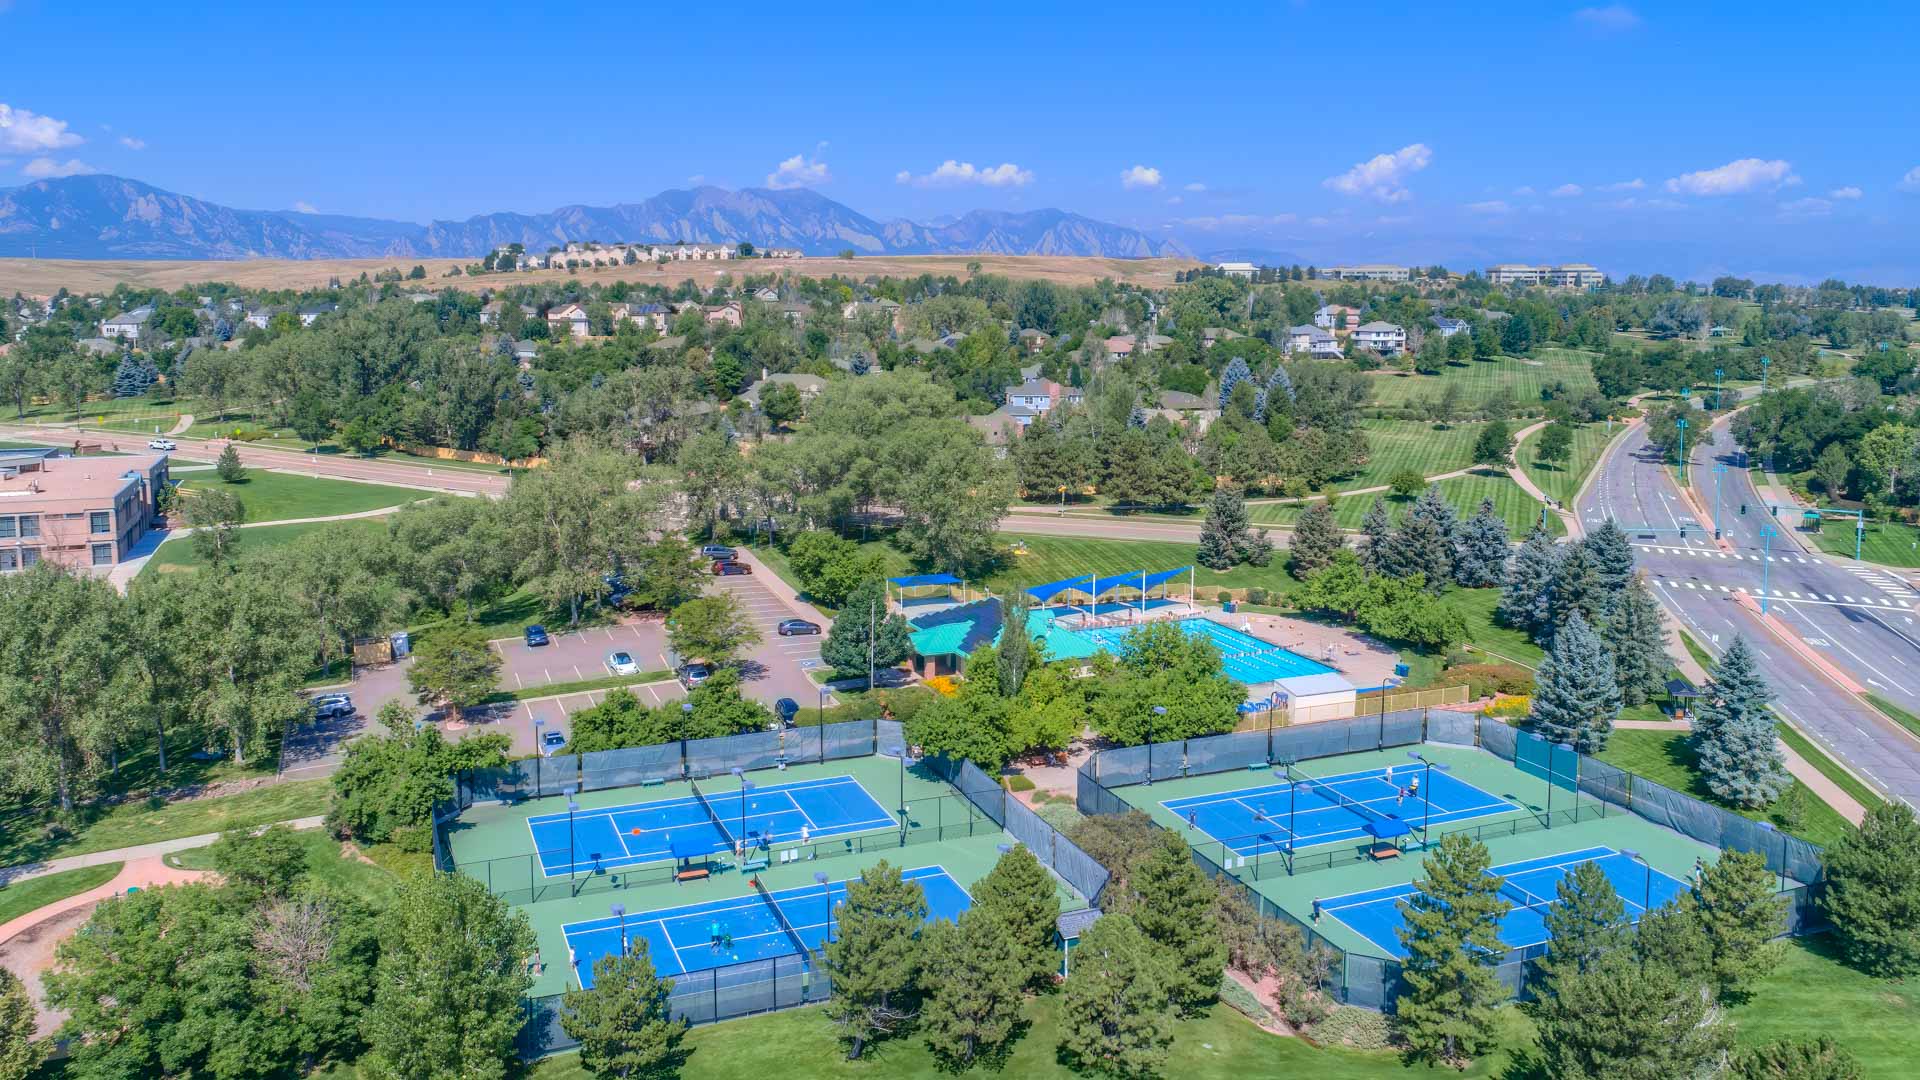 2411 Superior Aerial North Tennis Courts and Pool Summer 2020 5TMDE RVT2 PS 1920 - Home 2022